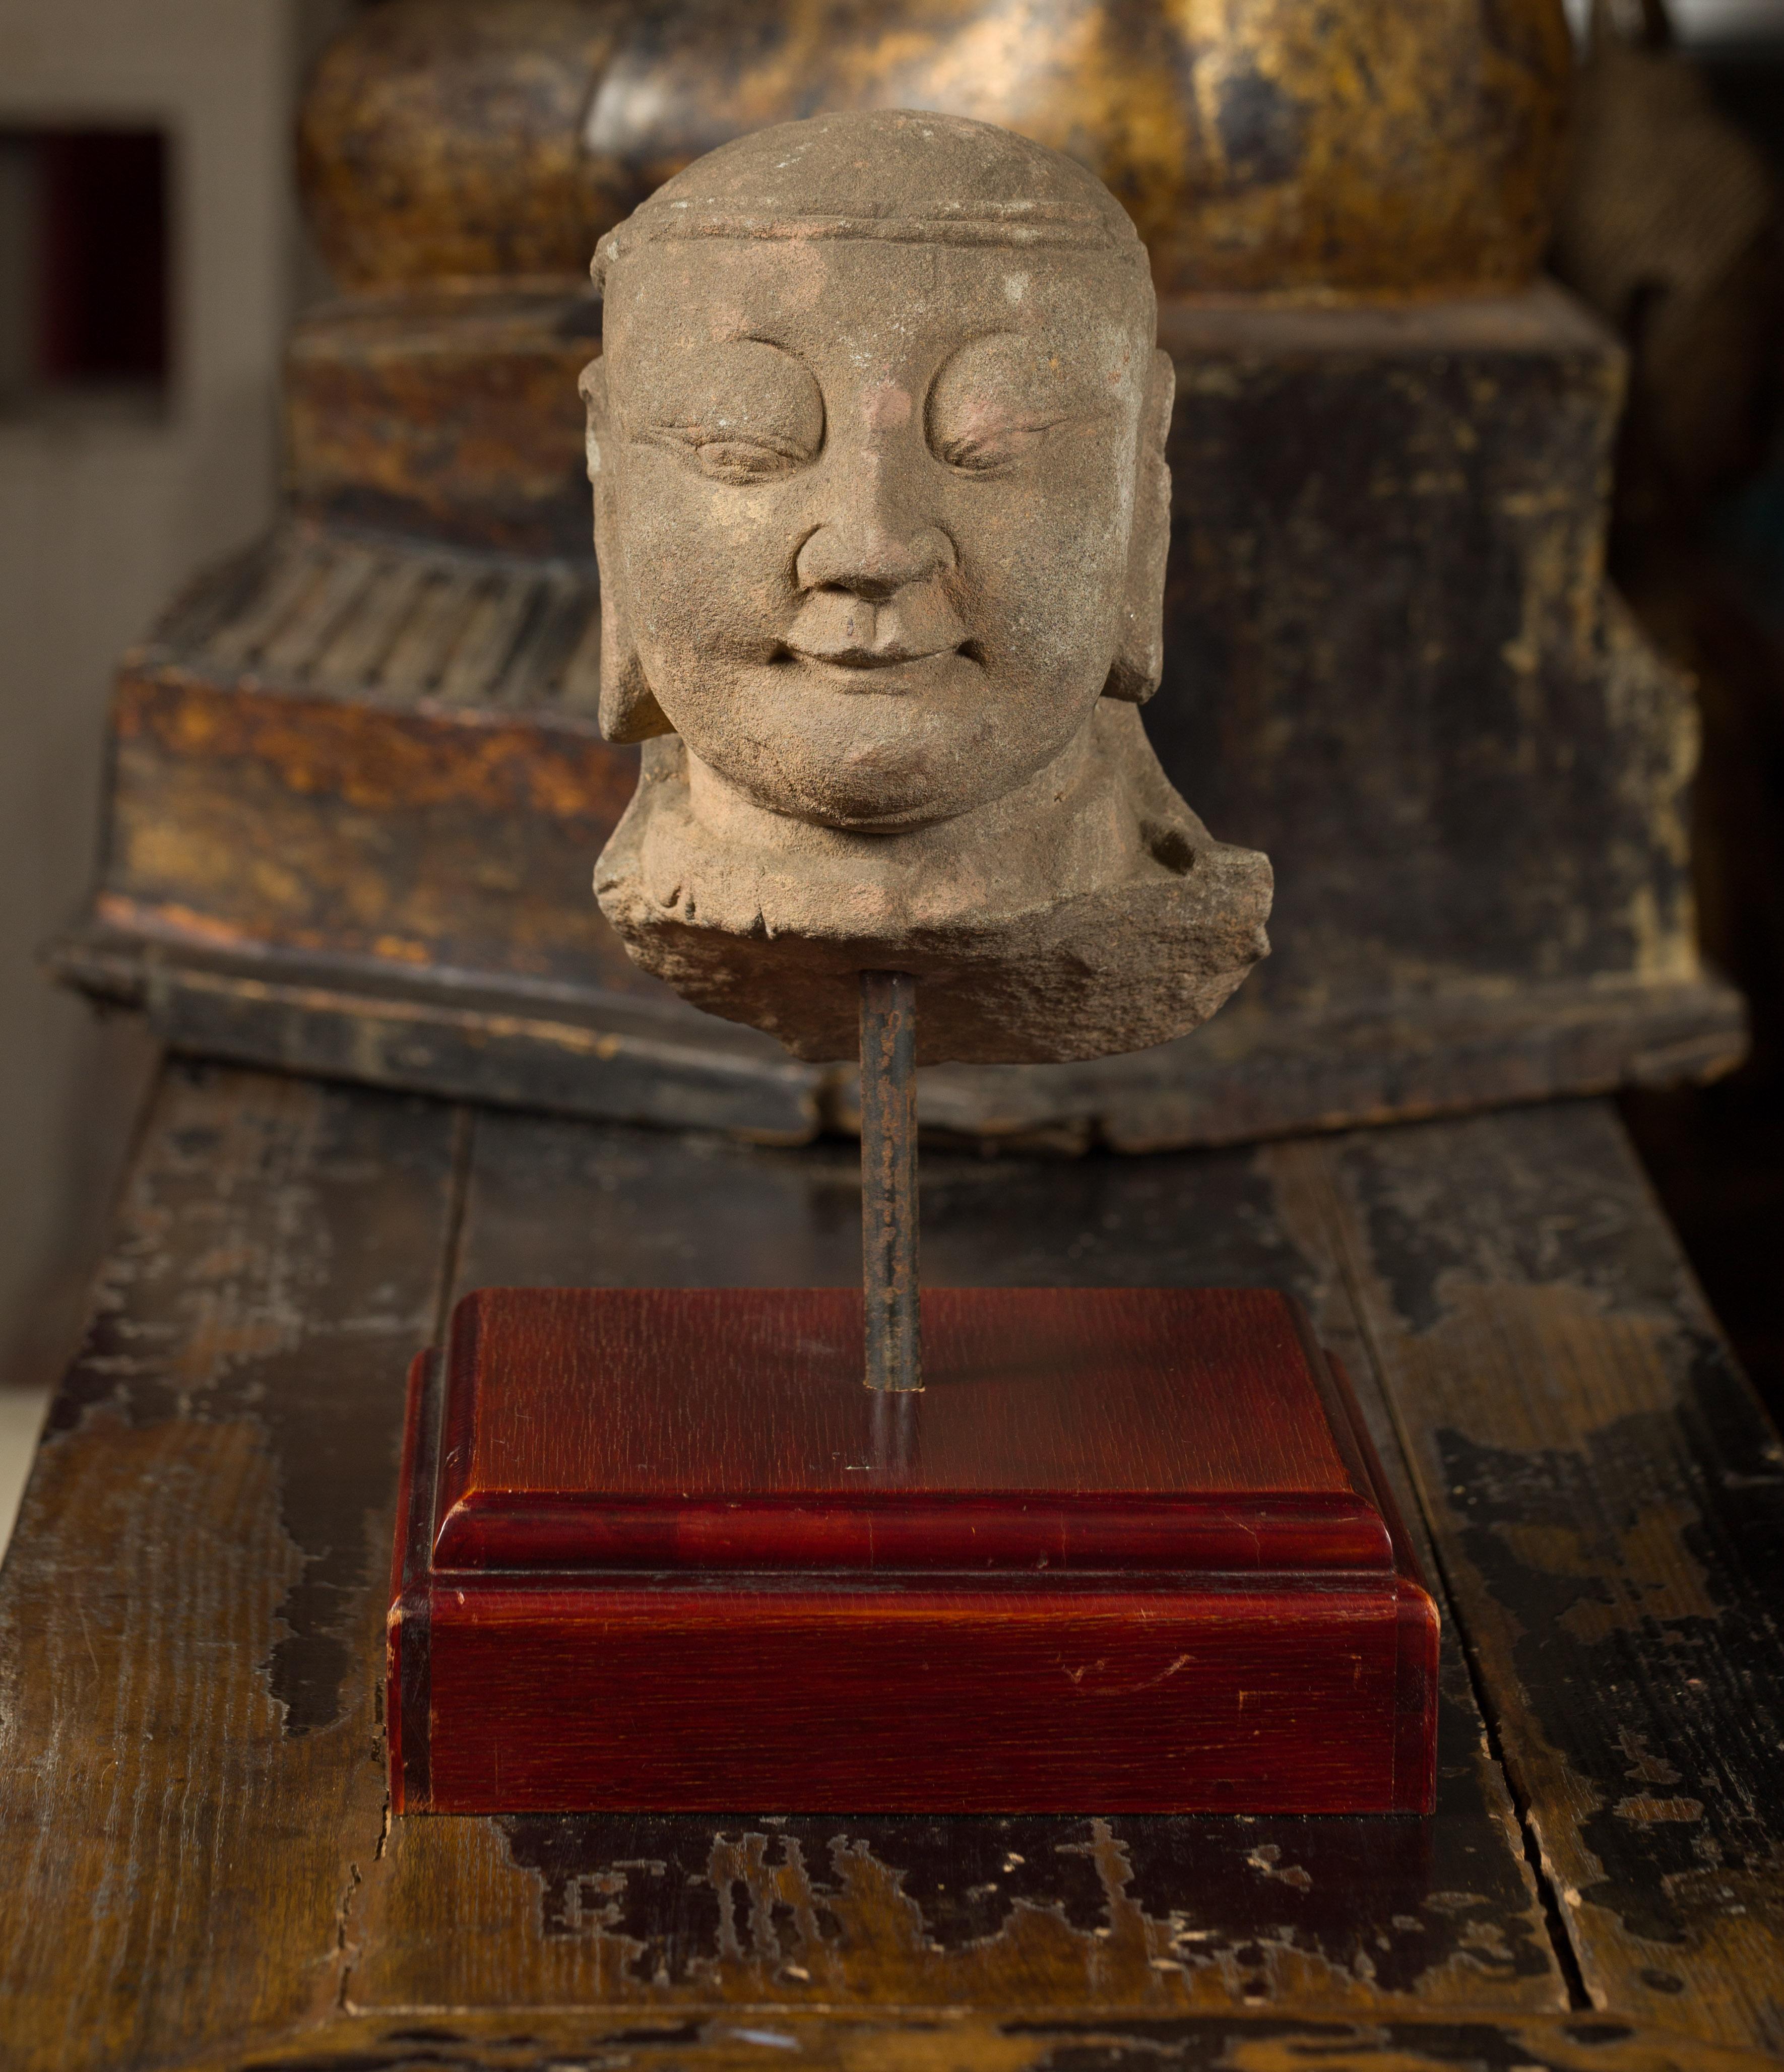 A Burmese hand carved stone sculpture from the 17th or 18th century, depicting a man's head and mounted on a custom wooden base. Hand carved from stone in Burma during the 17th or 18th century, this sculpture, featuring a man's head and showcasing a